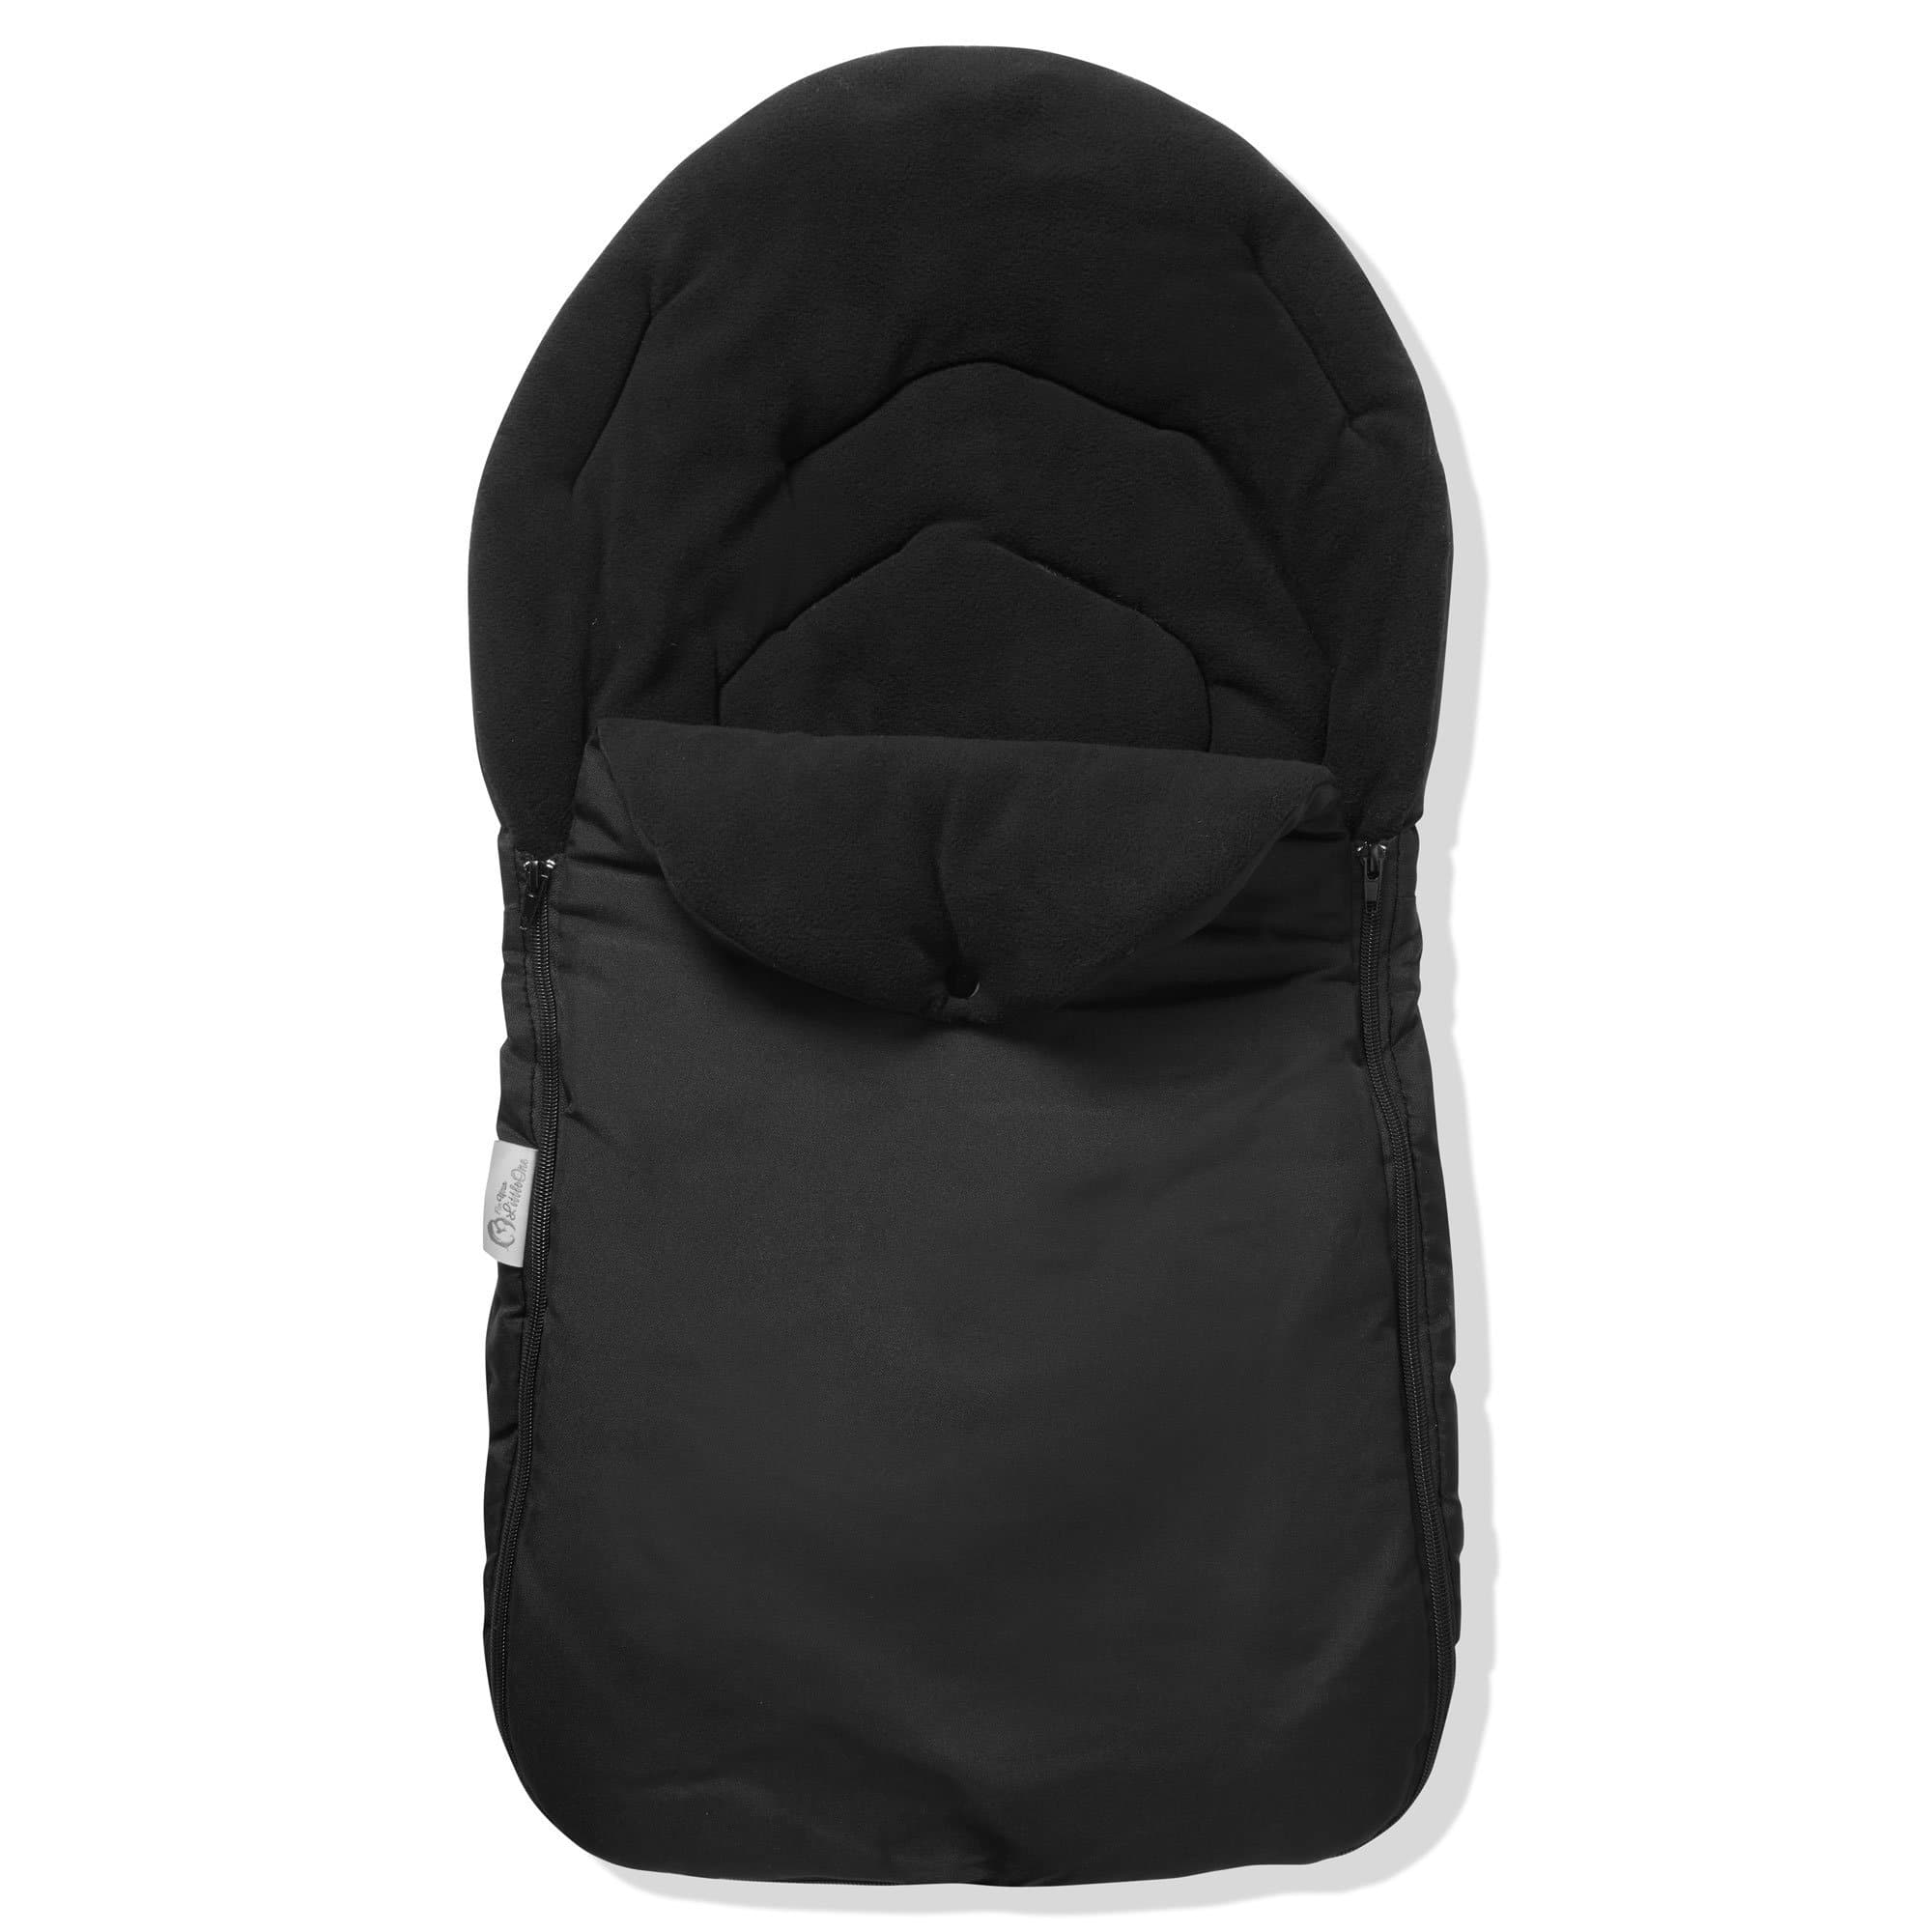 Car Seat Footmuff / Cosy Toes Compatible with BeSafe - Black / Fits All Models | For Your Little One